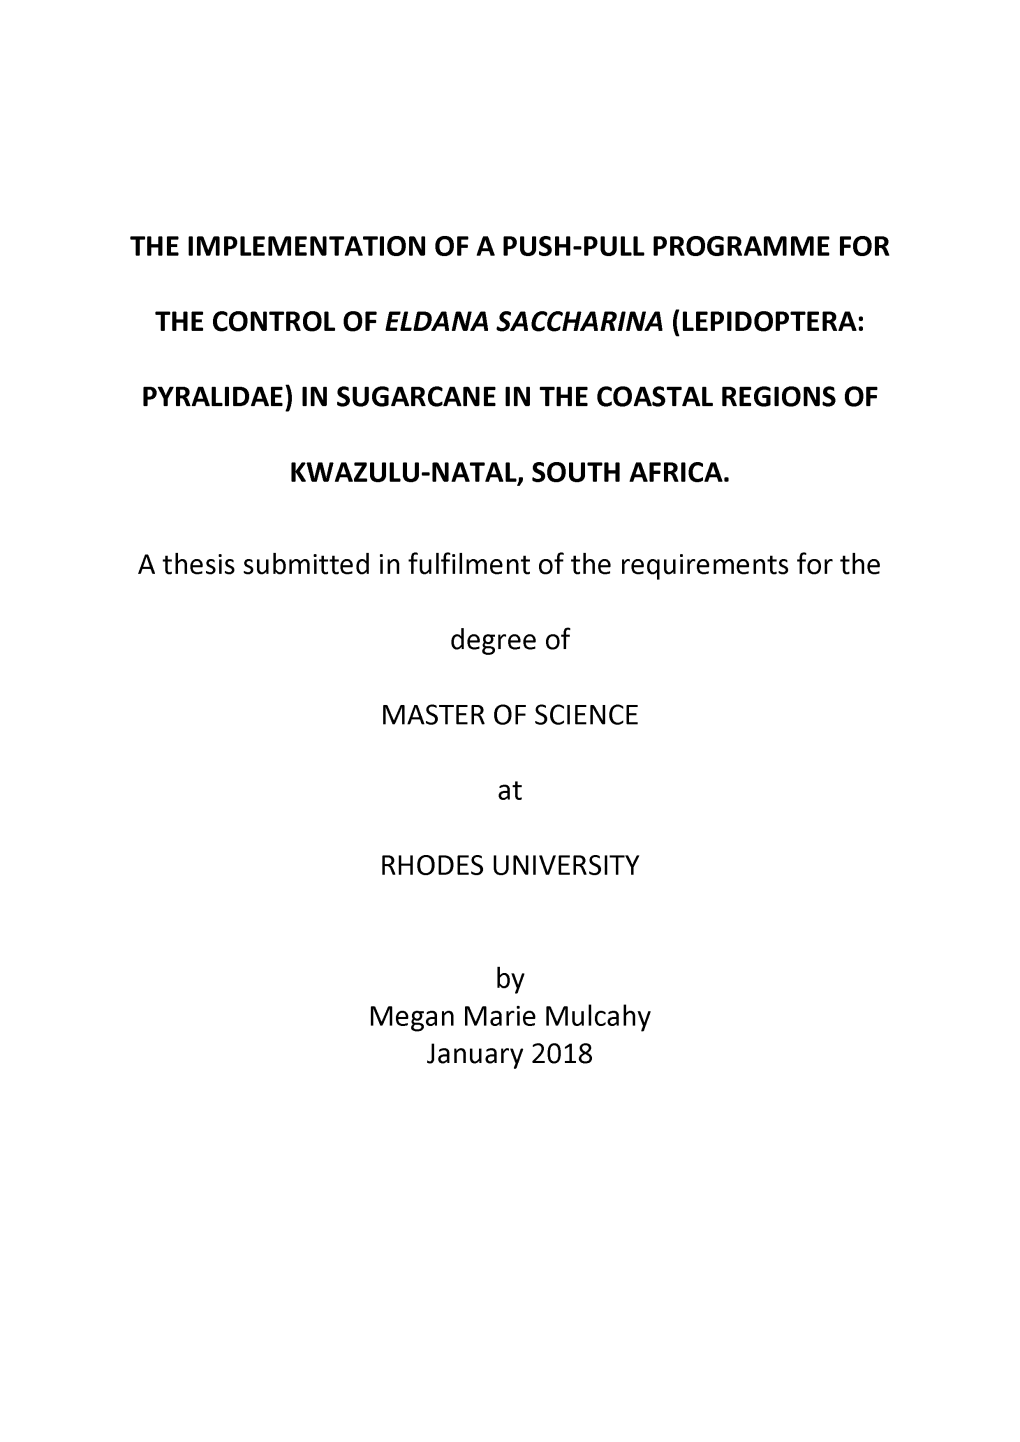 The Implementation of a Push-Pull Programme for the Control of Eldana Saccharina (Lepidoptera: Pyralidae) in Sugarcane in the Co